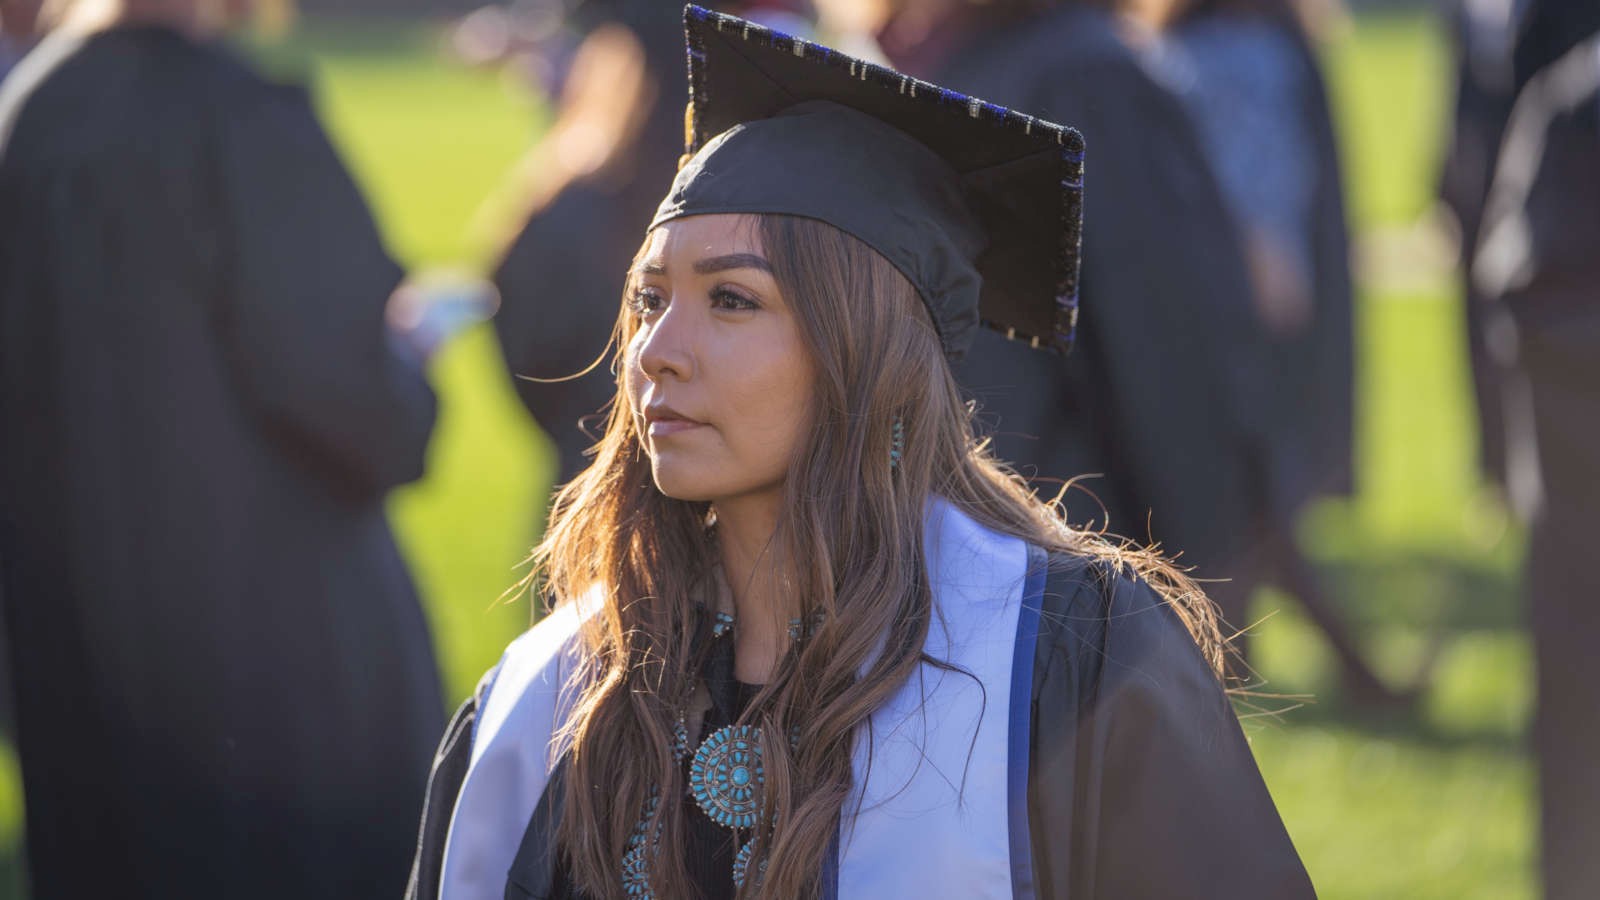   Full Size A woman wears graduation robes at Utah State University Commencement celebrations